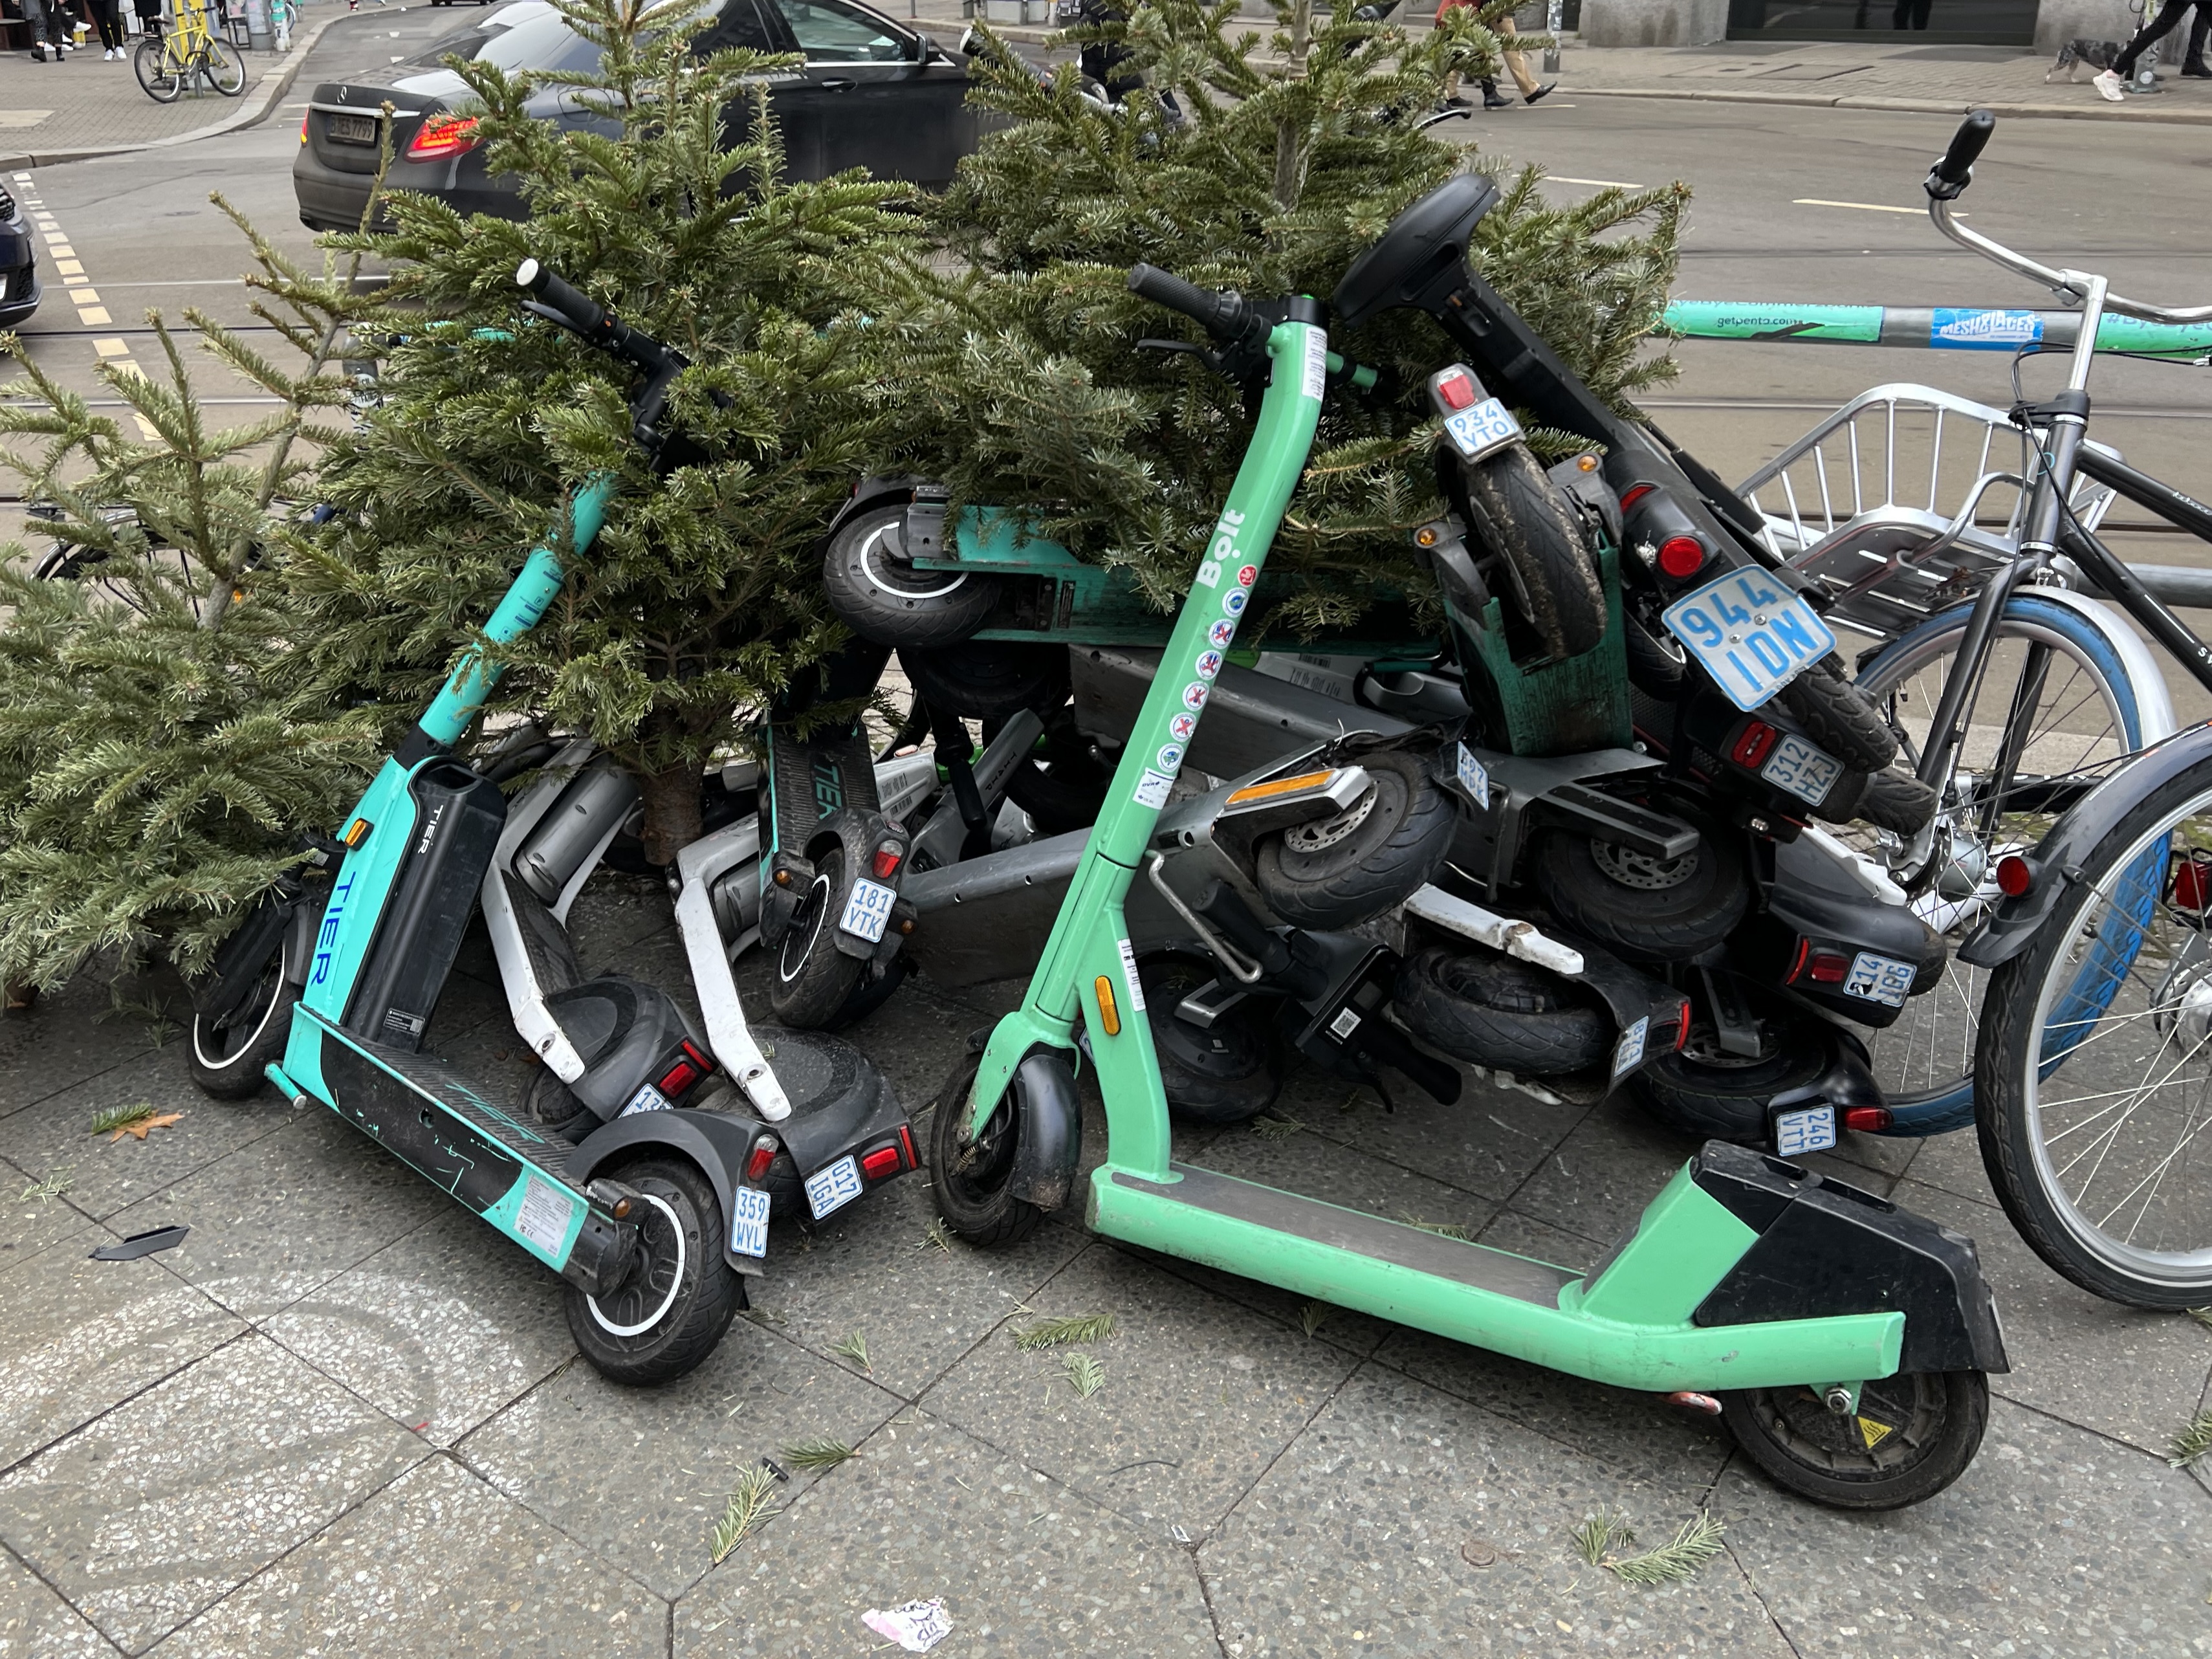 Scooters in Christmas trees